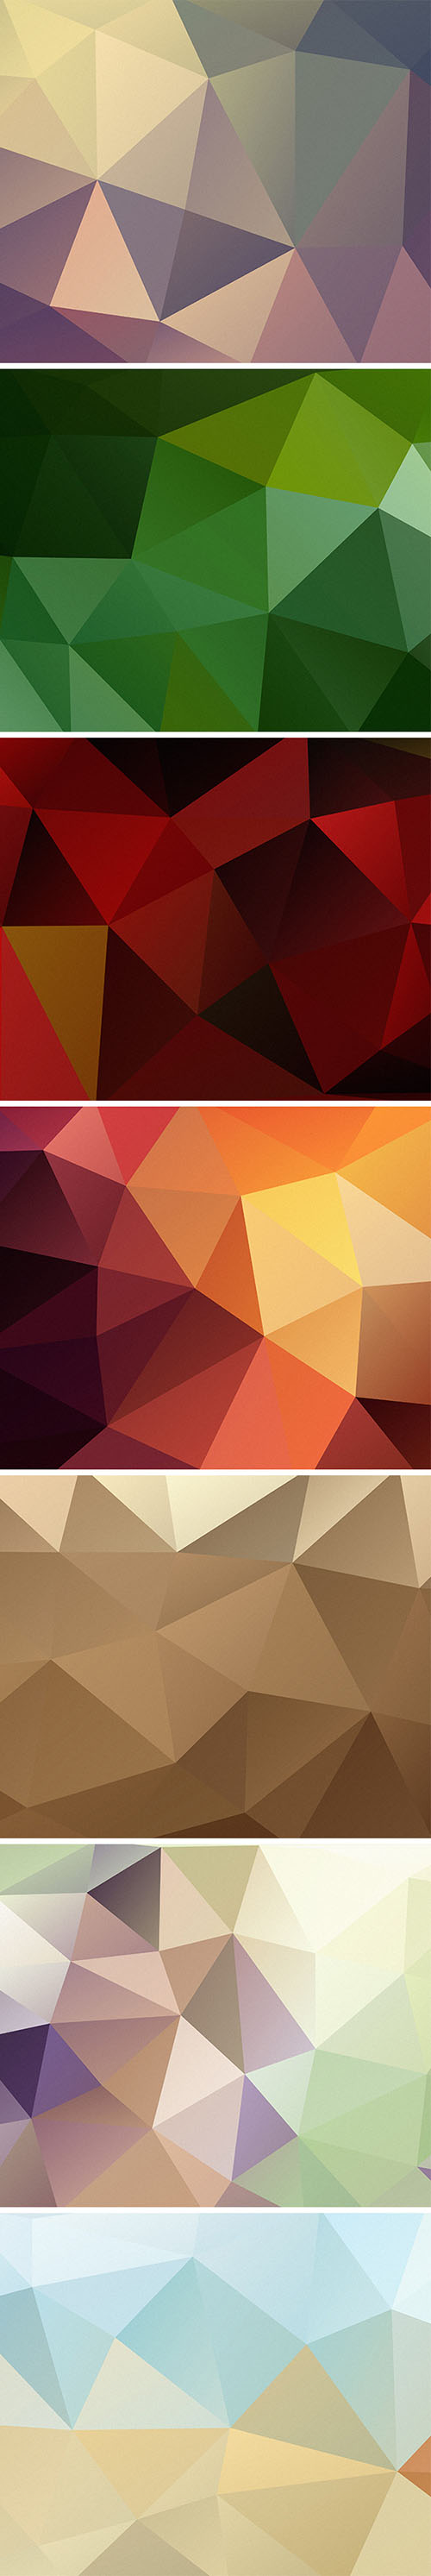 Textures - 7 HD Polygon Backgrounds